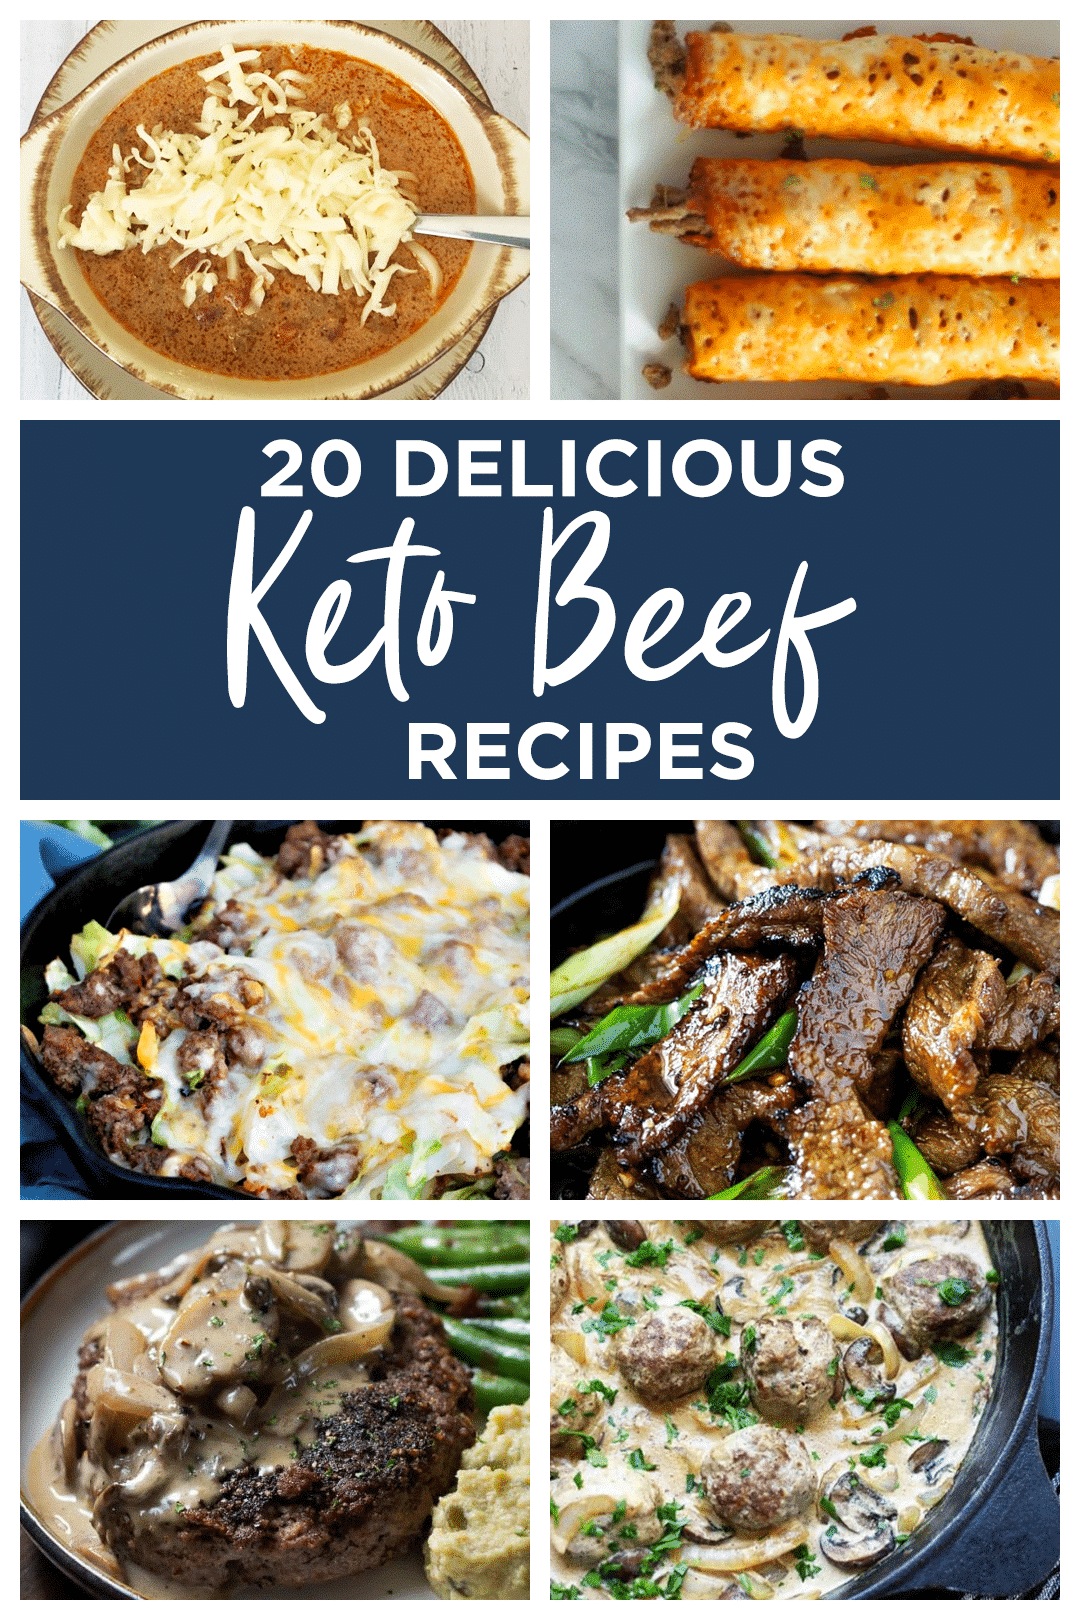 Keto Beef Recipes Collage 